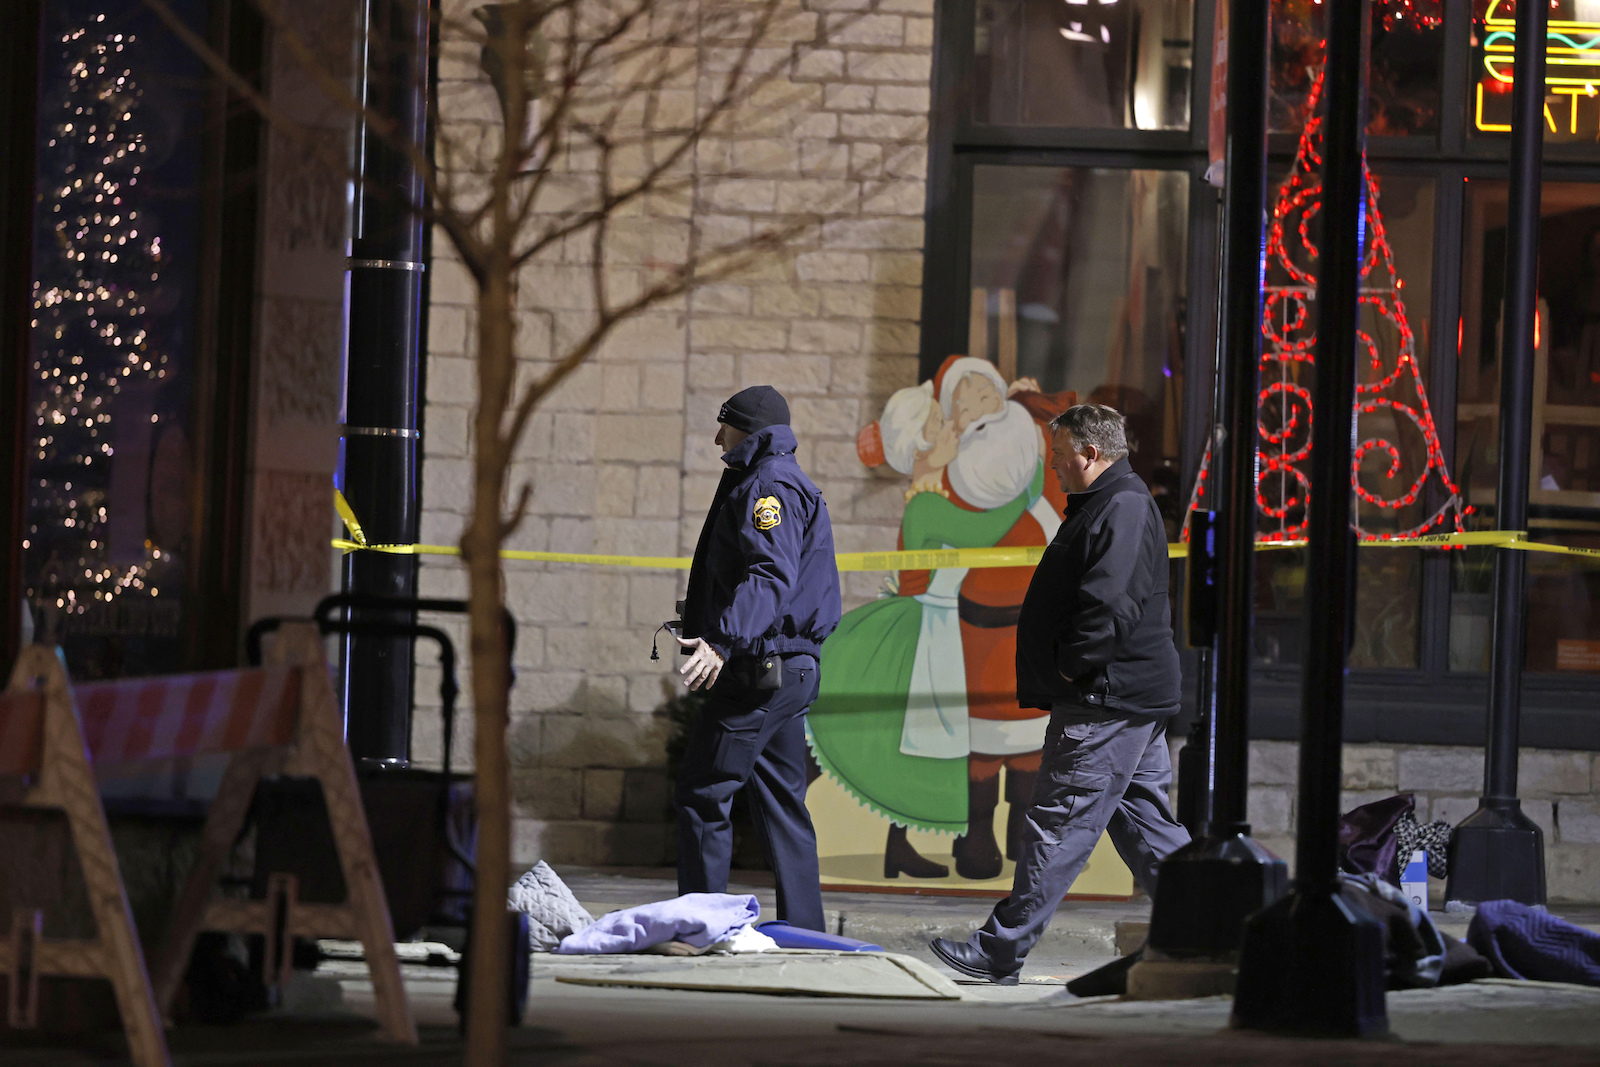 Holiday decorations frame police investigators in downtown Waukesha, Wisconsin, after a vehicle plowed into a Christmas parade, killing five people and injuring dozens of others, Nov. 21, 2021. (AP Photo Jeffrey Phelps)